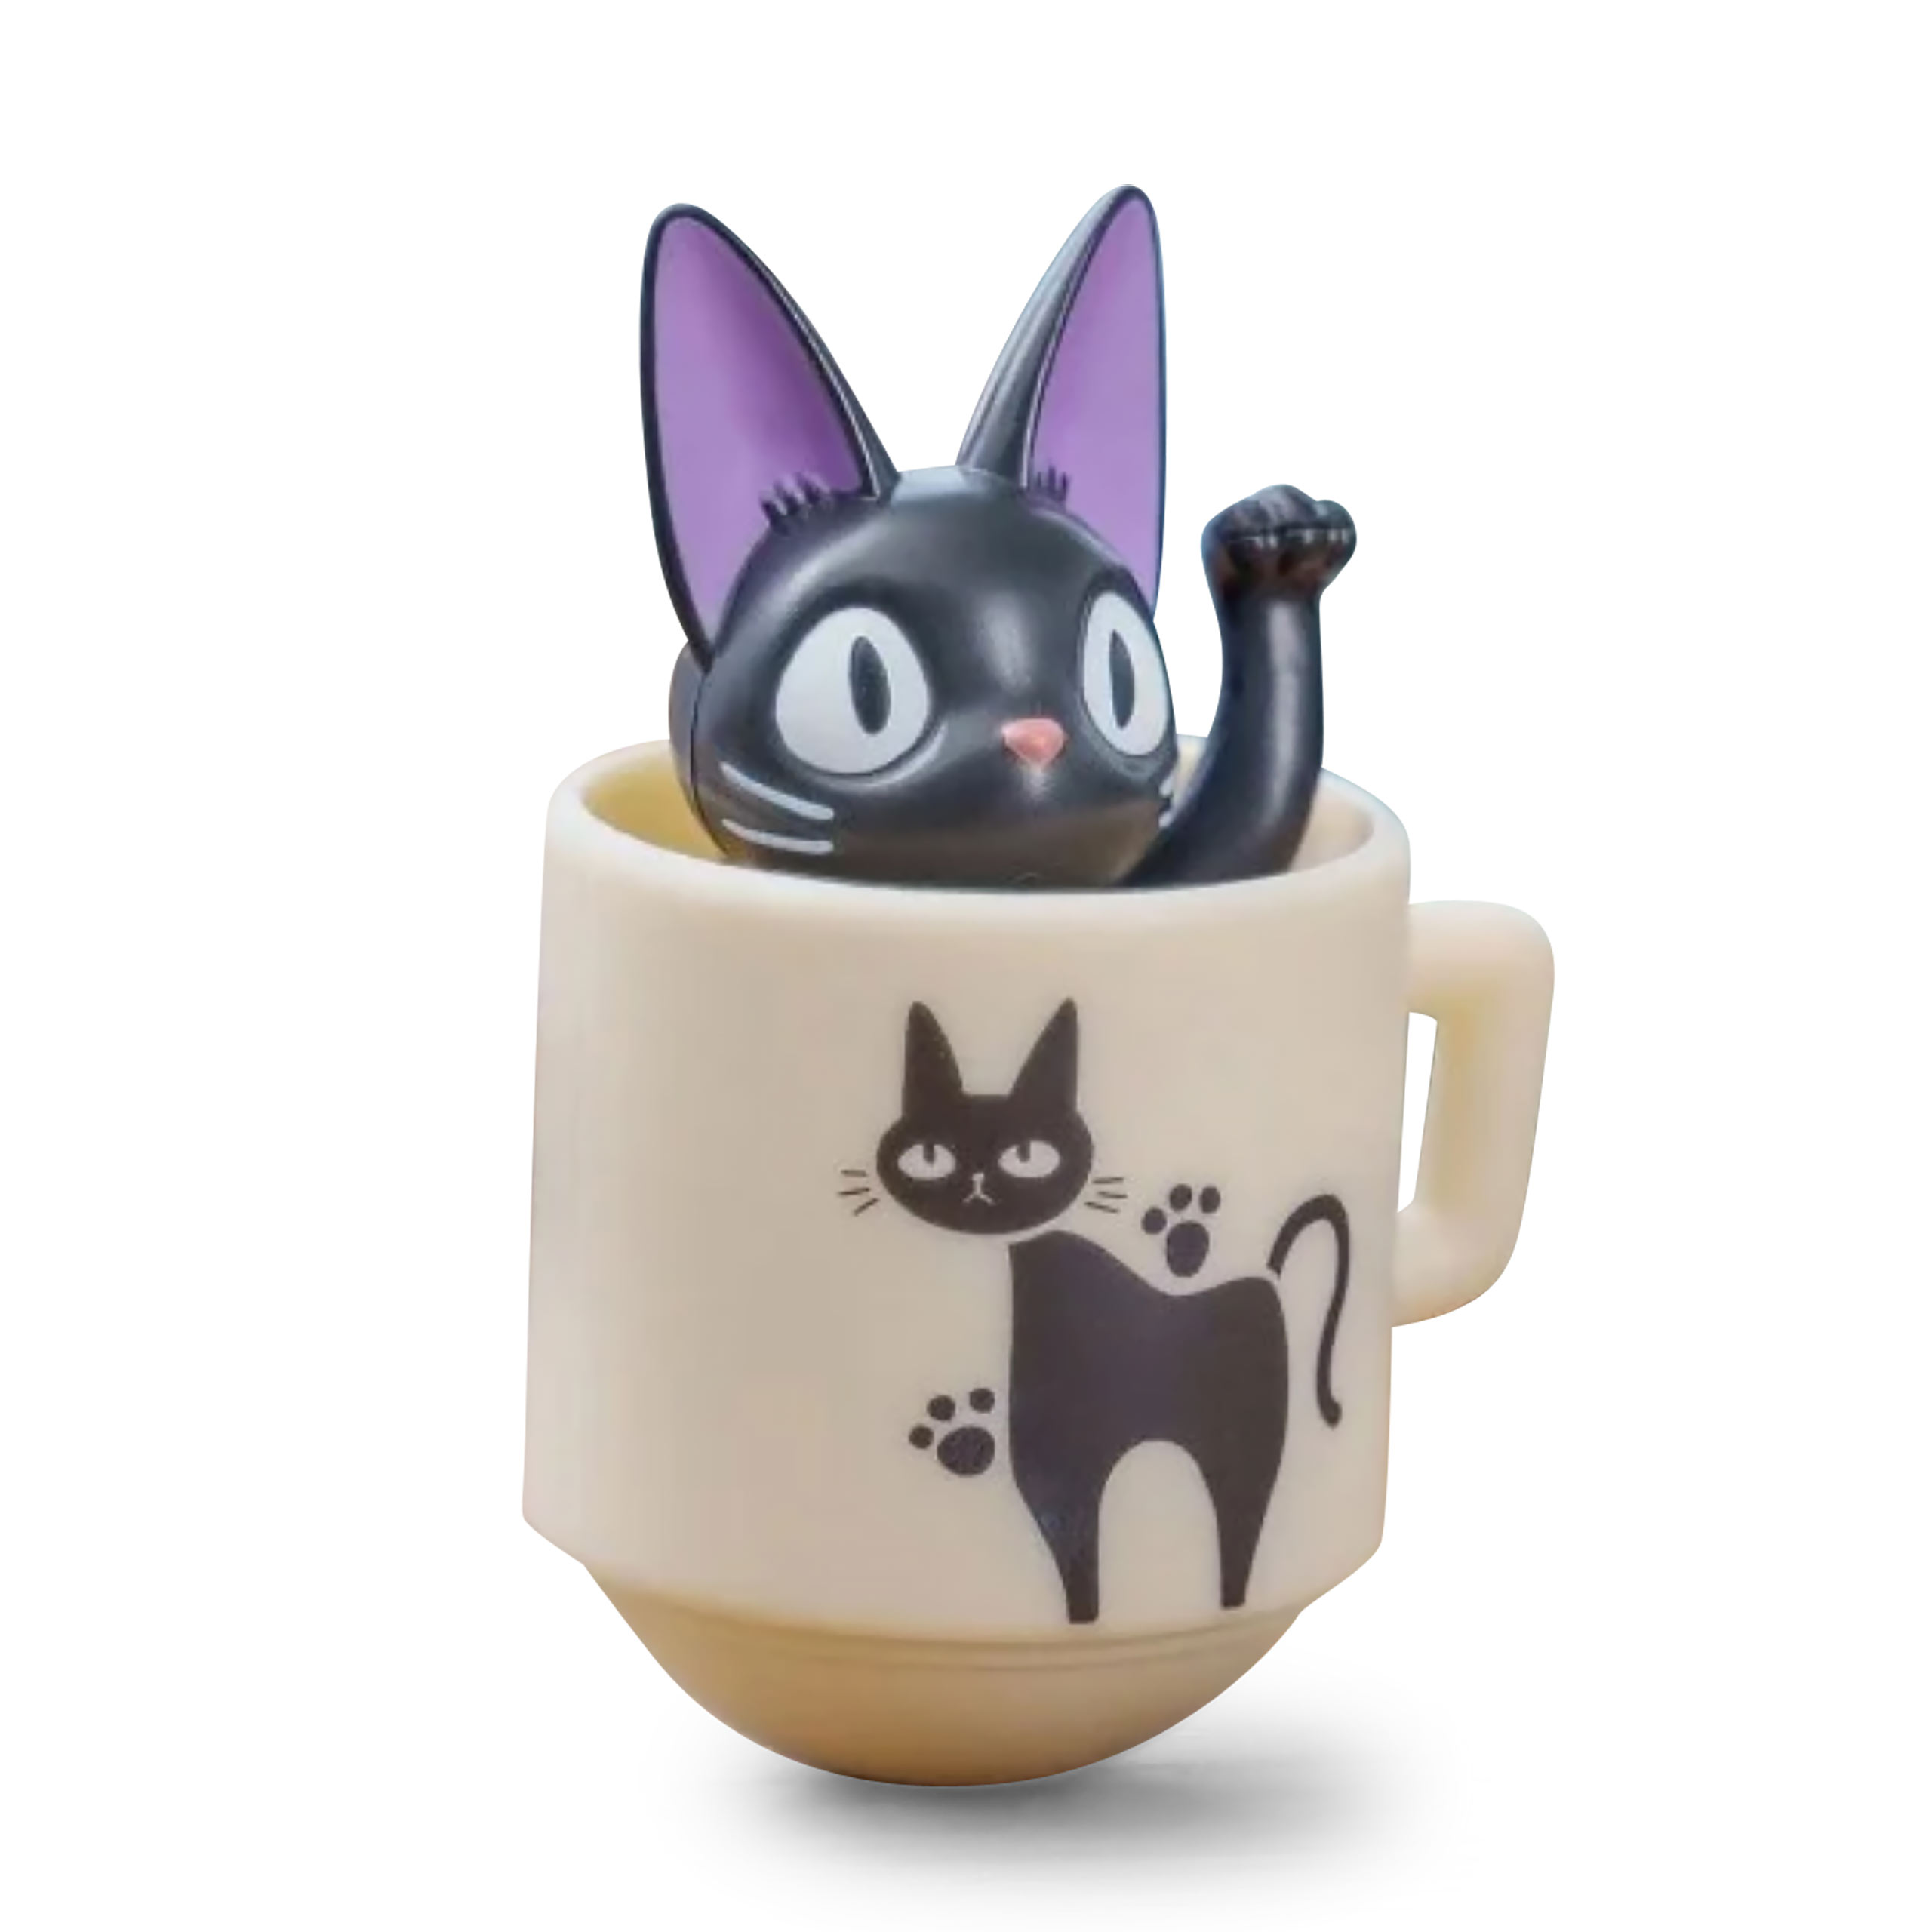 Kiki's Delivery Service - Jiji in Cup Roly-poly Figure